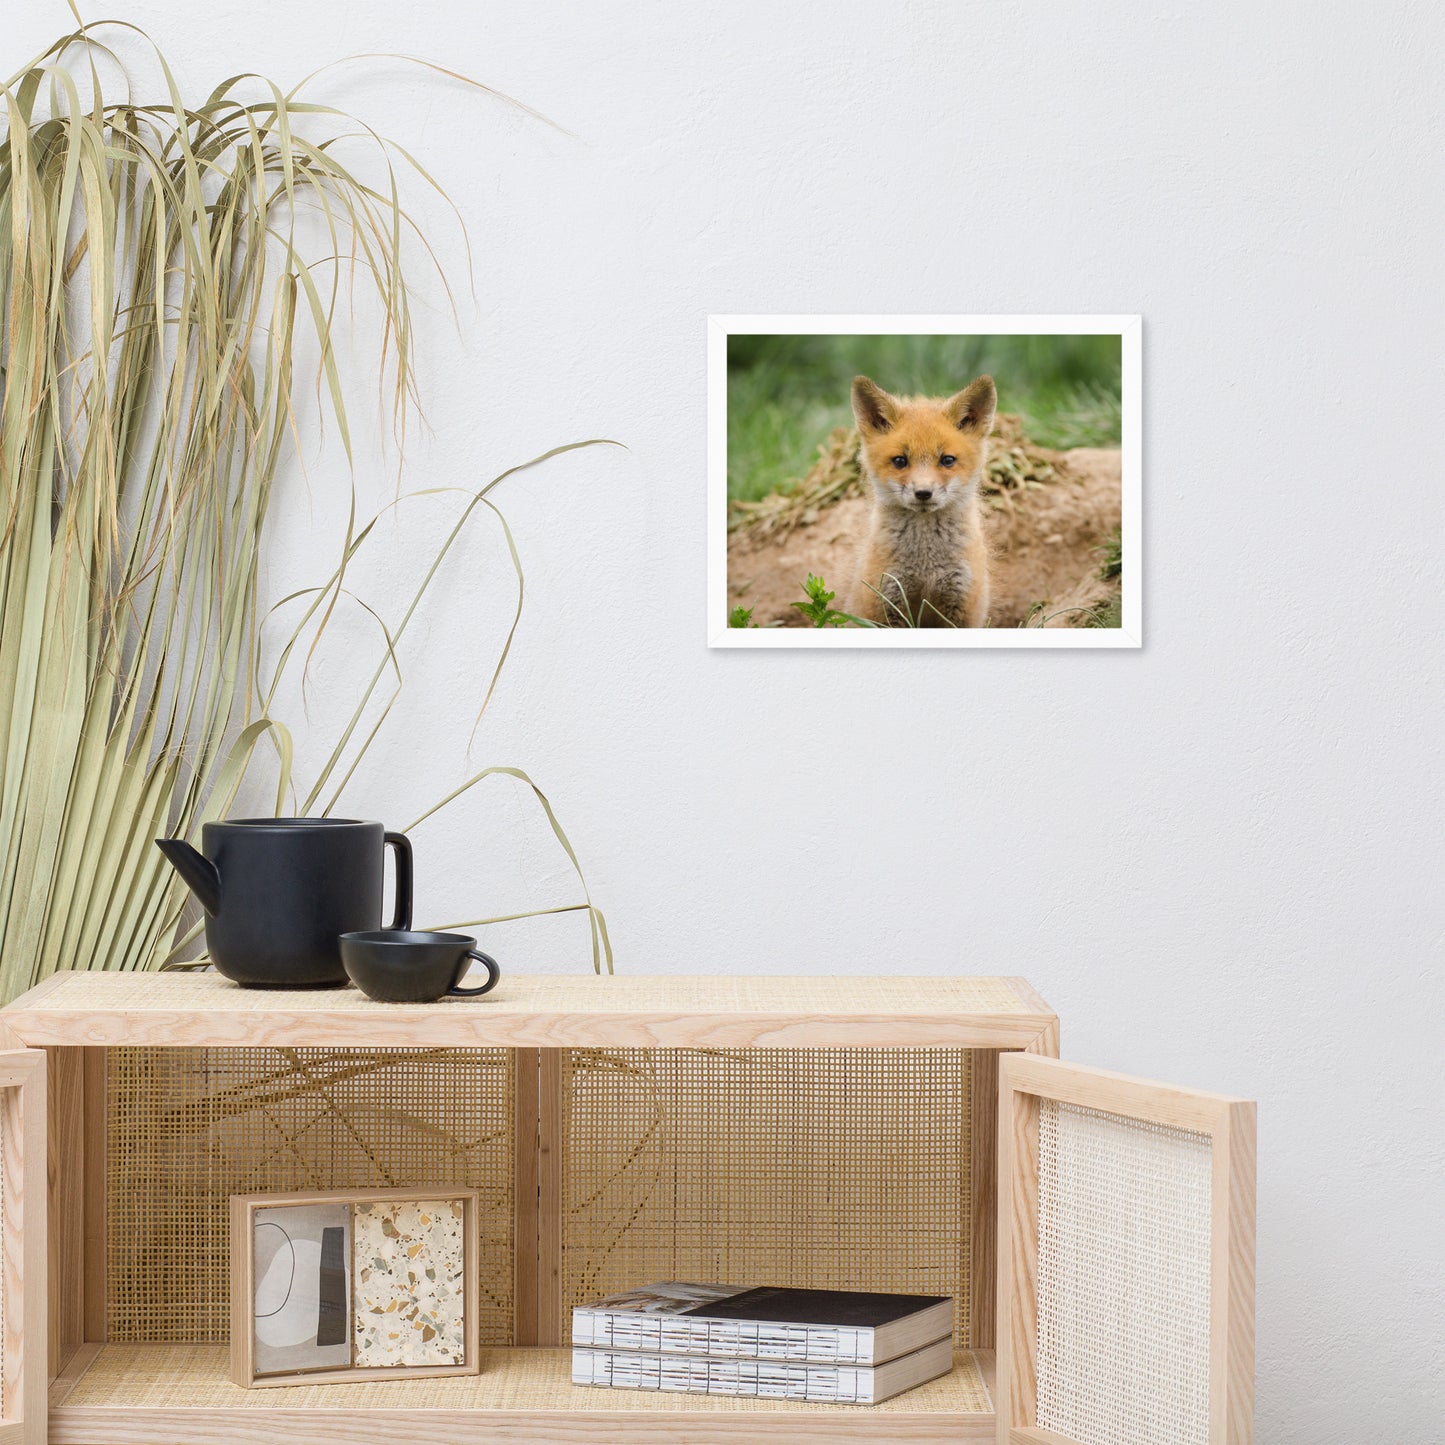 Unique Bathroom Pictures: Baby Young Red Fox Kit/ Animal / Wildlife / Nature Photographic Artwork - Framed Artwork - Wall Decor